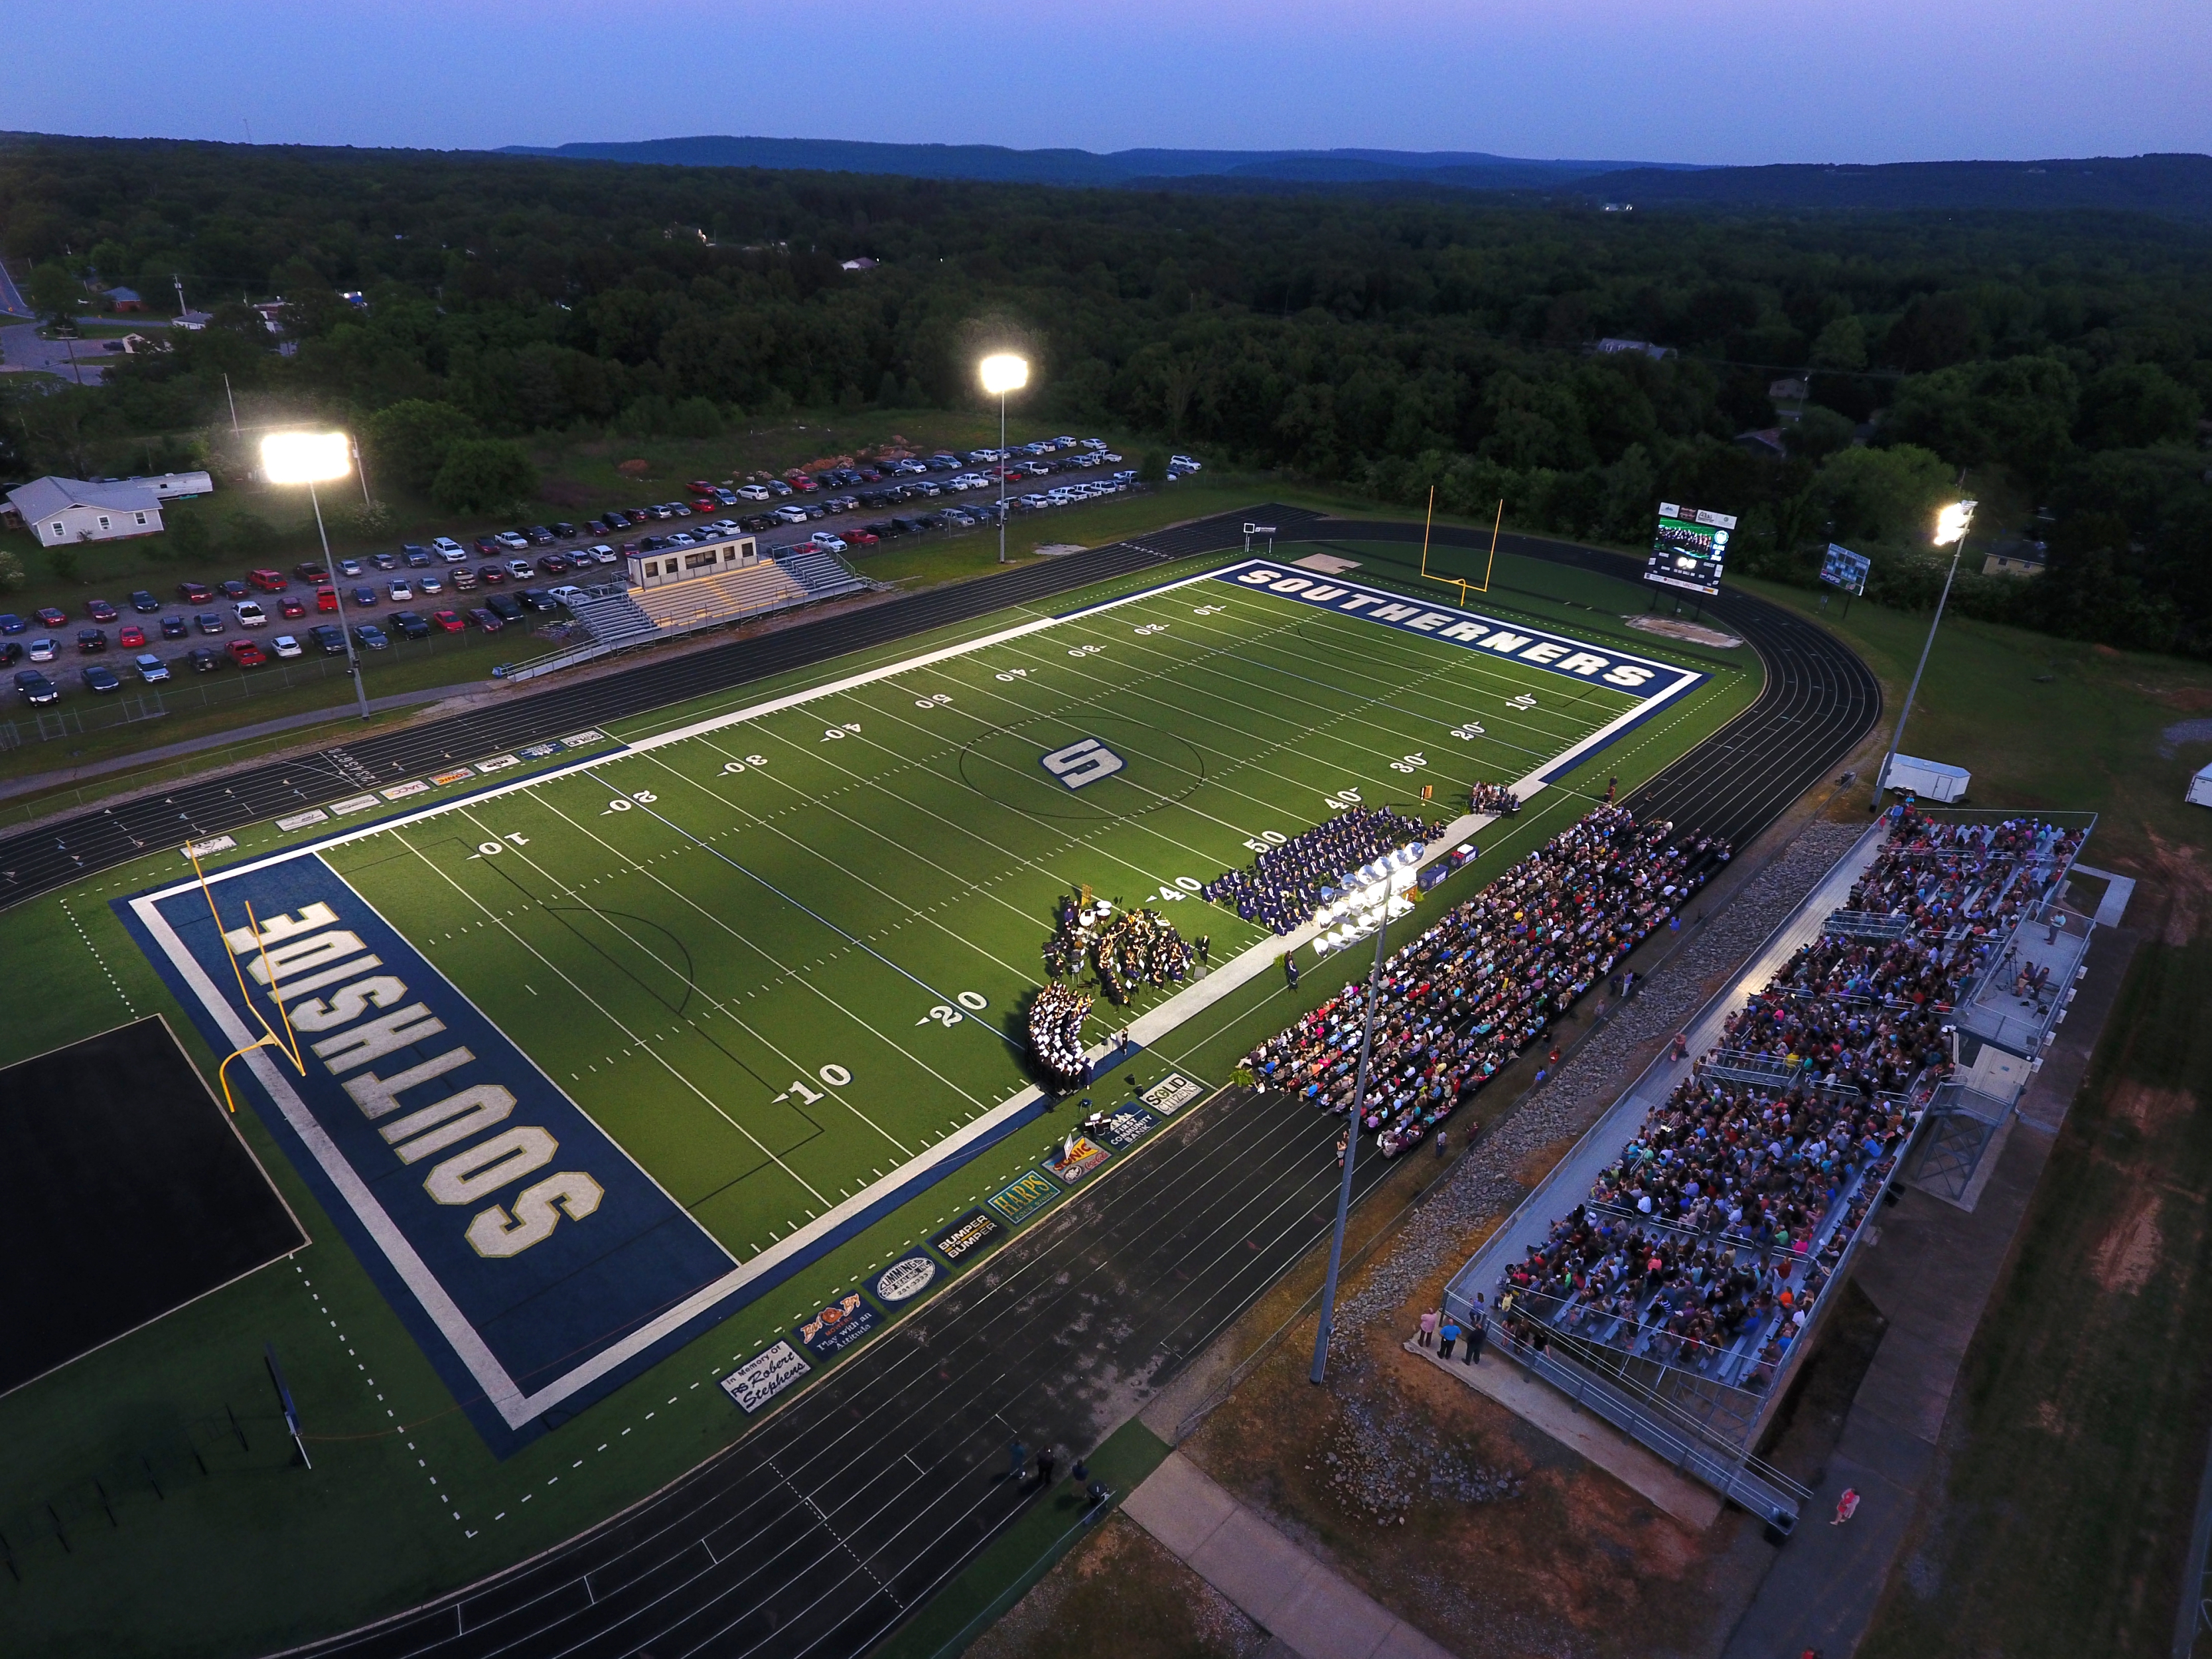 Drone view of the Southside Southerner football stadium at twilight, with students gathering on the field